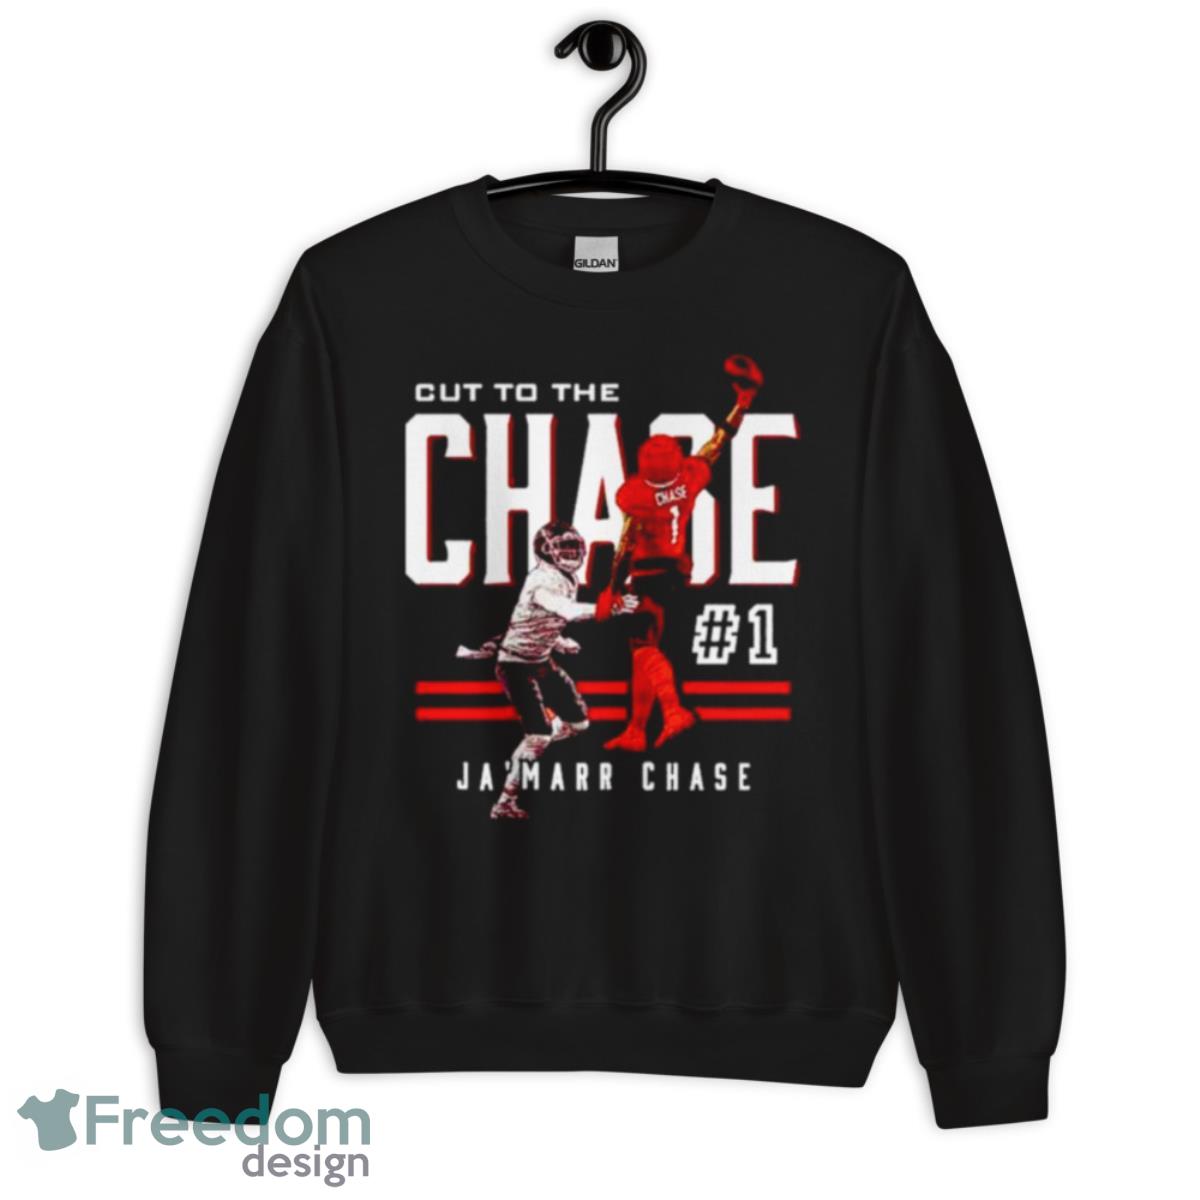 Cut to the Chase Ja'Marr Chase Cincinnati Bengals one hand catch shirt -  Freedomdesign